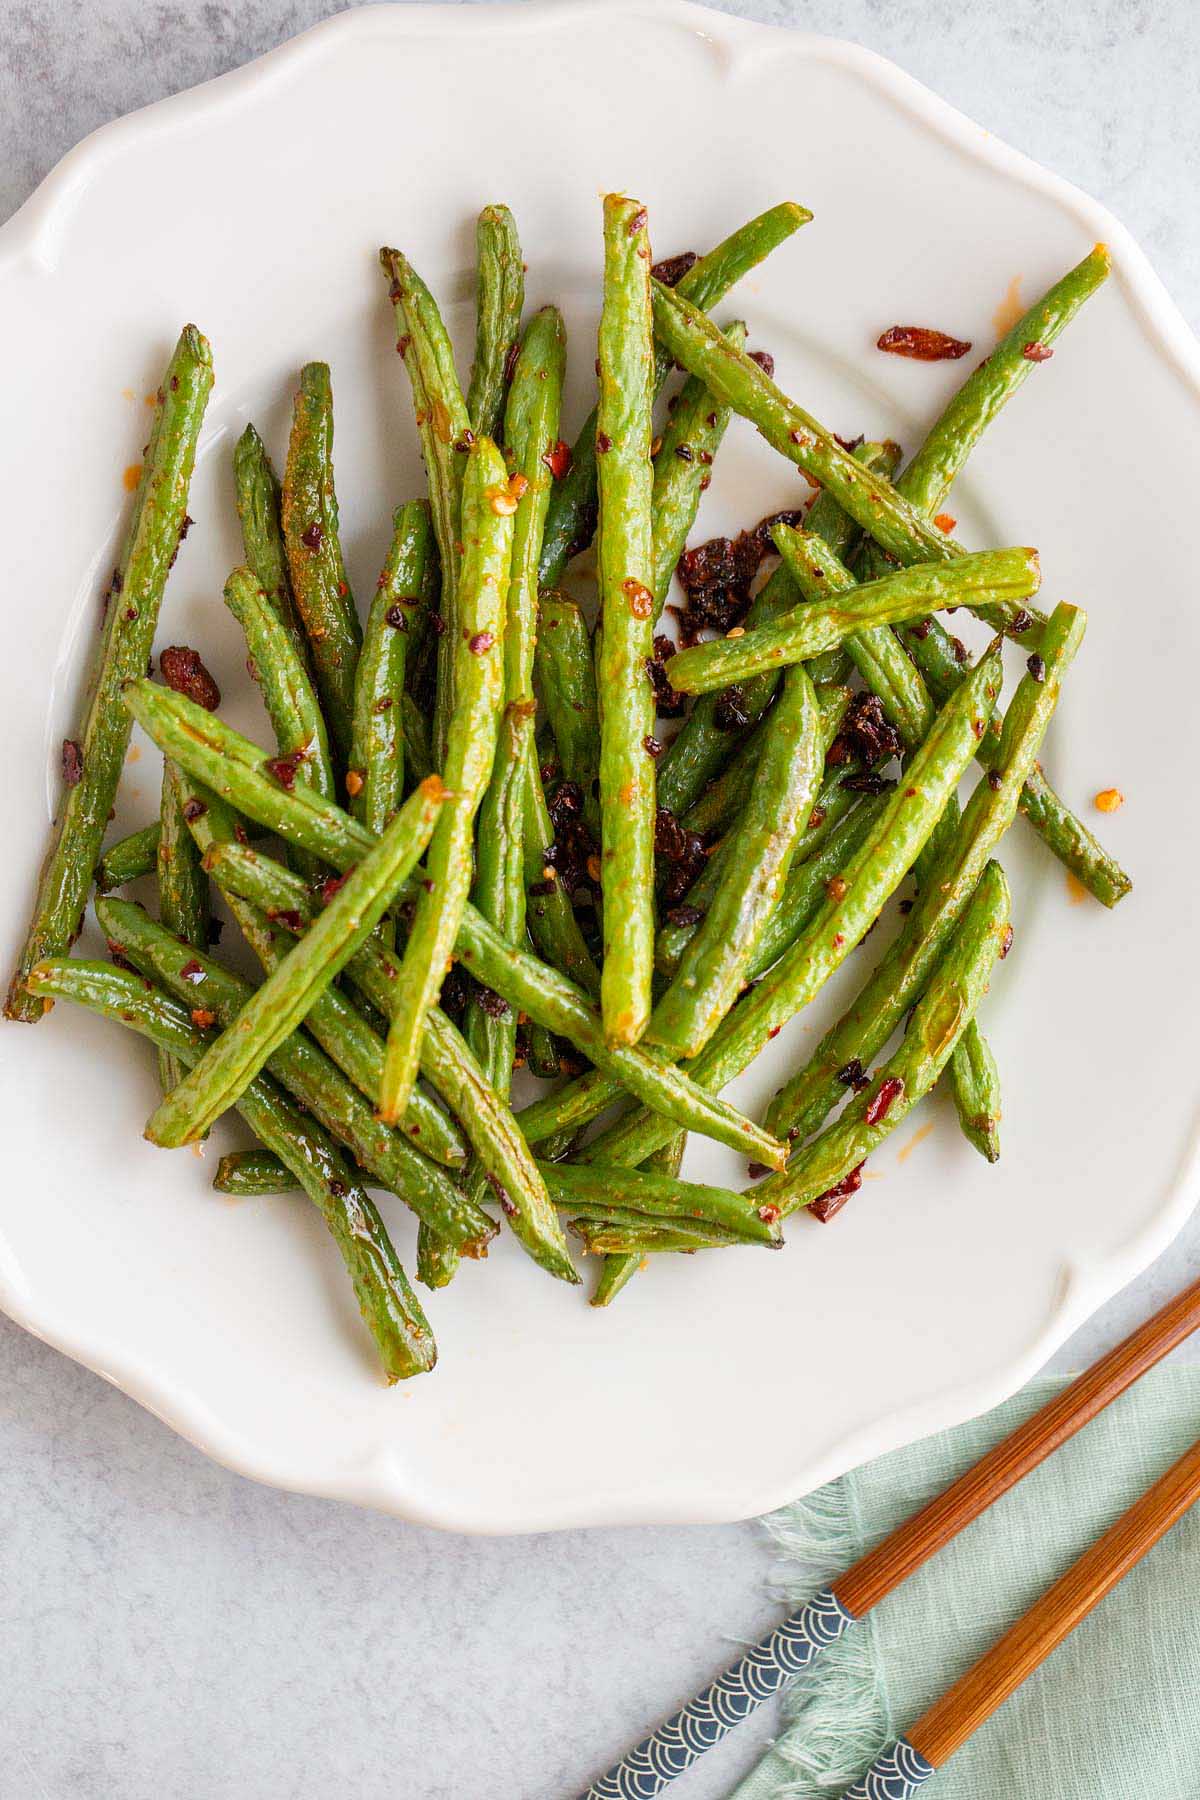 Chili crisp green beans on a plate.